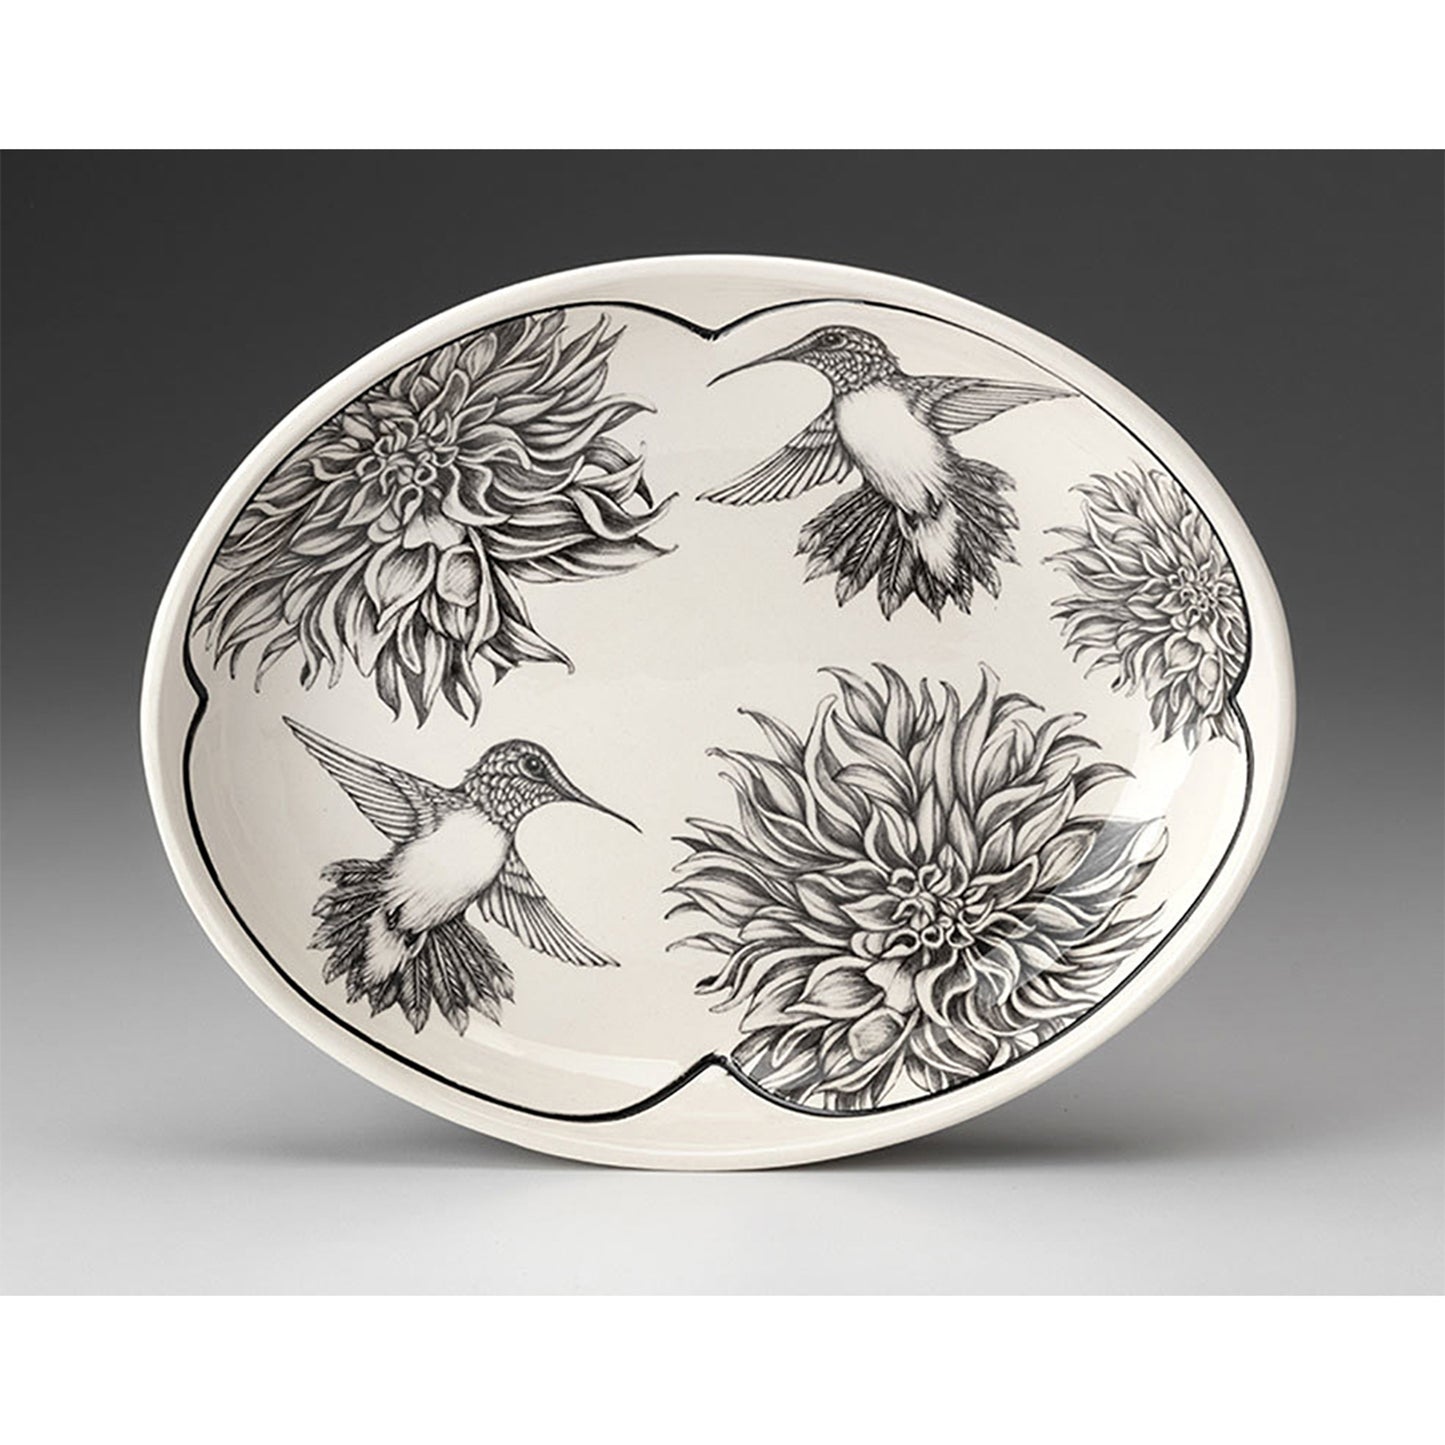 Laura Zindel Small Serving Dish - More designs available